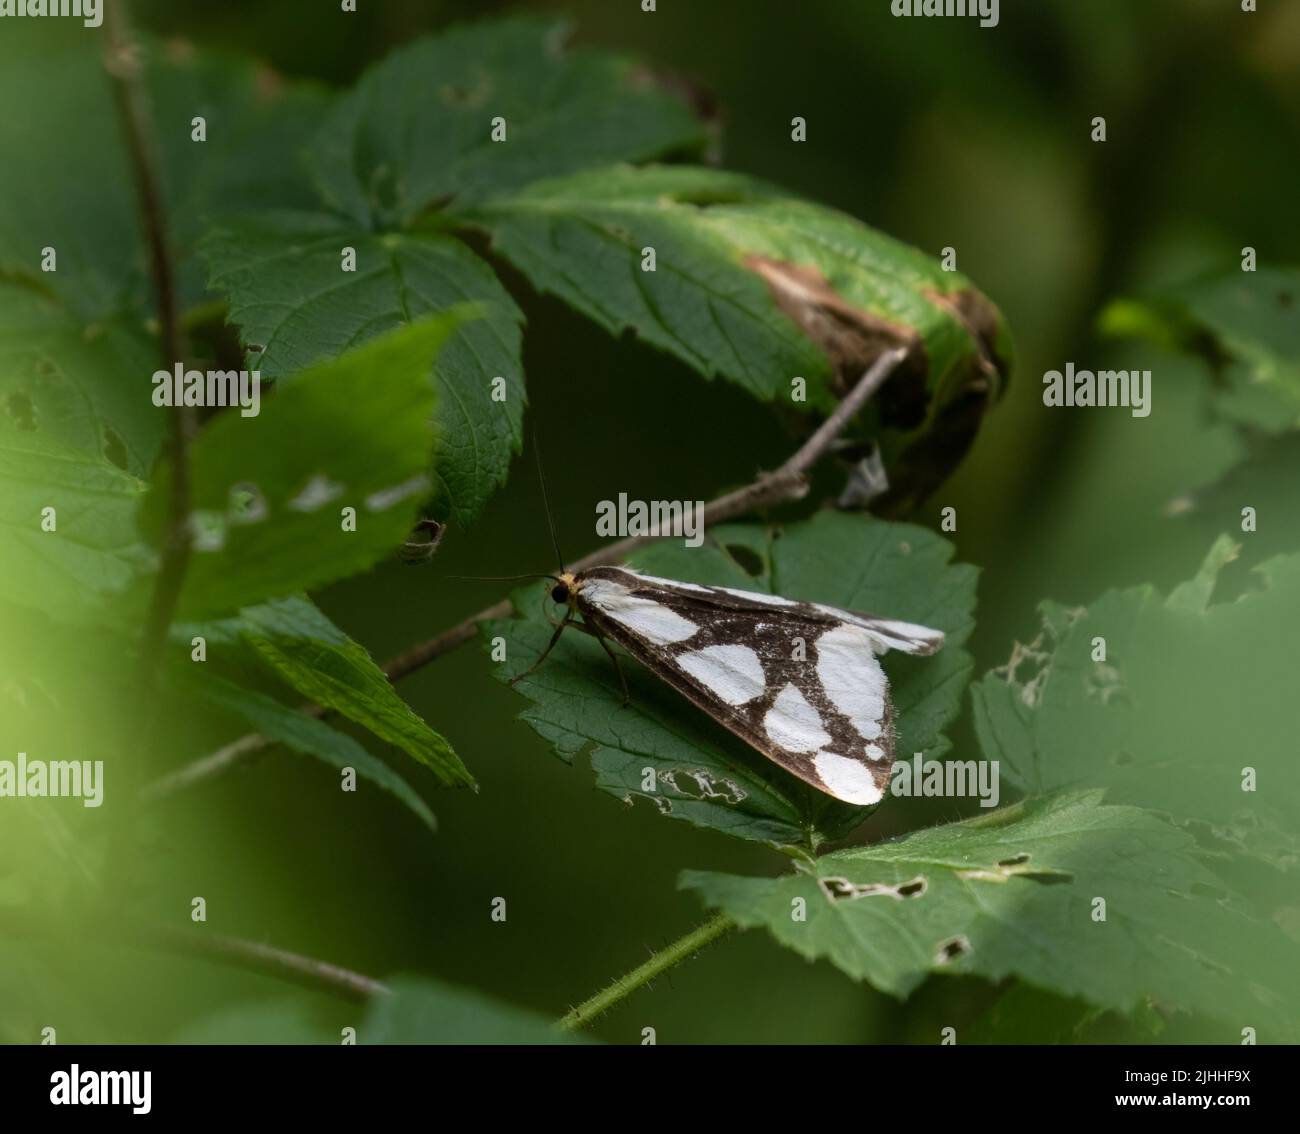 A closeup of a Colona Moth on green leaves in Algonquin Park Stock Photo